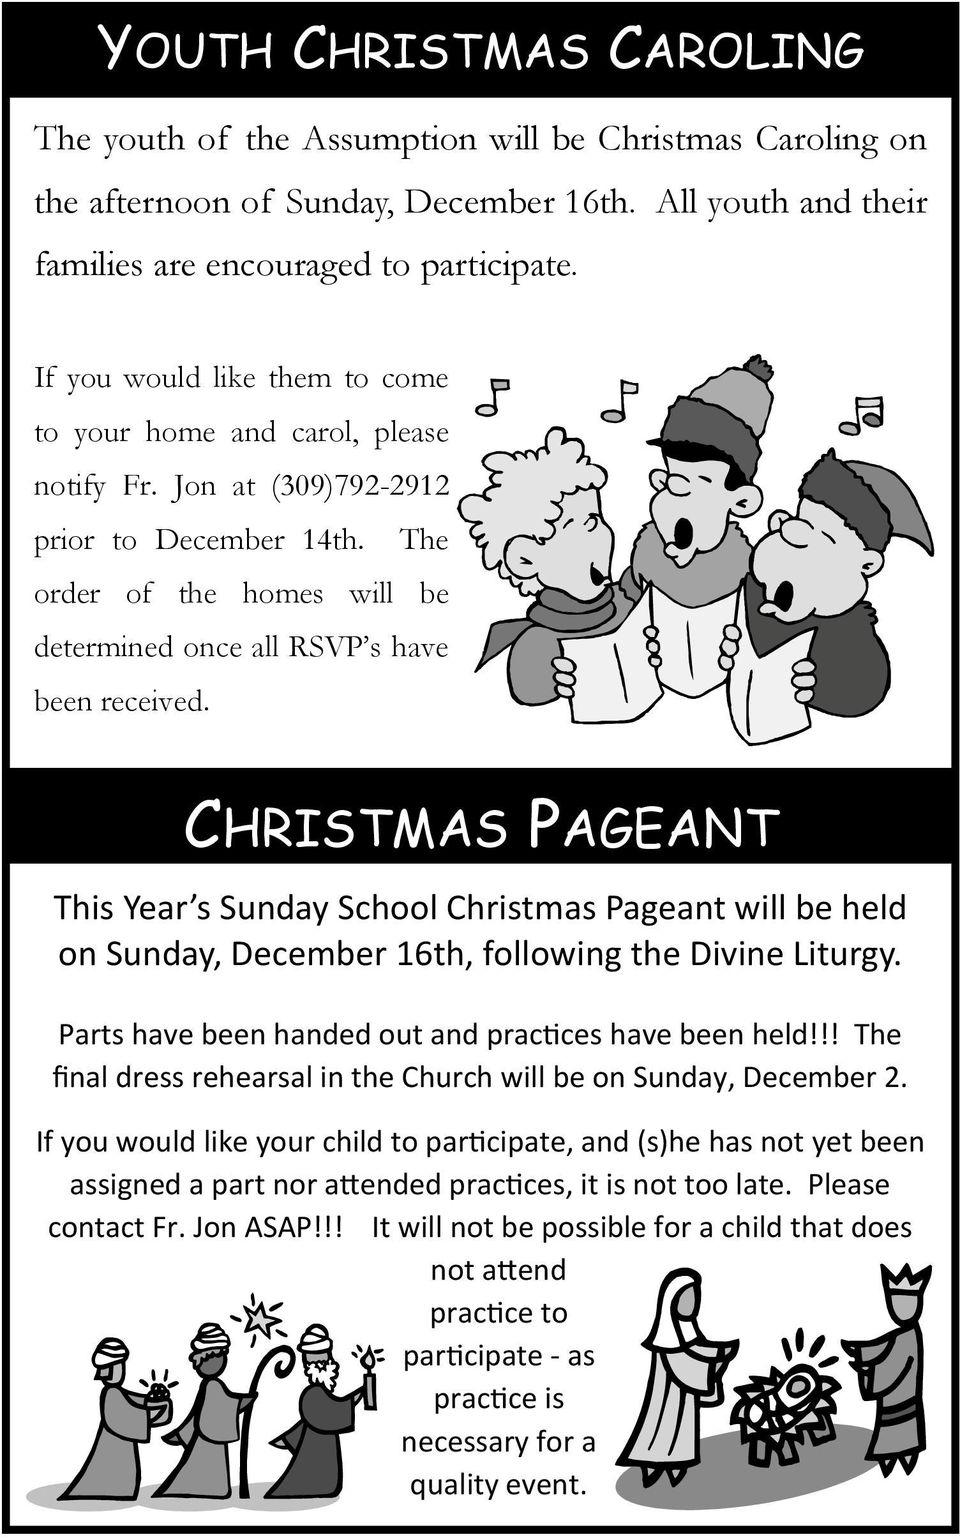 CHRISTMAS PAGEANT This Year s Sunday School Christmas Pageant will be held on Sunday, December 16th, following the Divine Liturgy. Parts have been handed out and practices have been held!